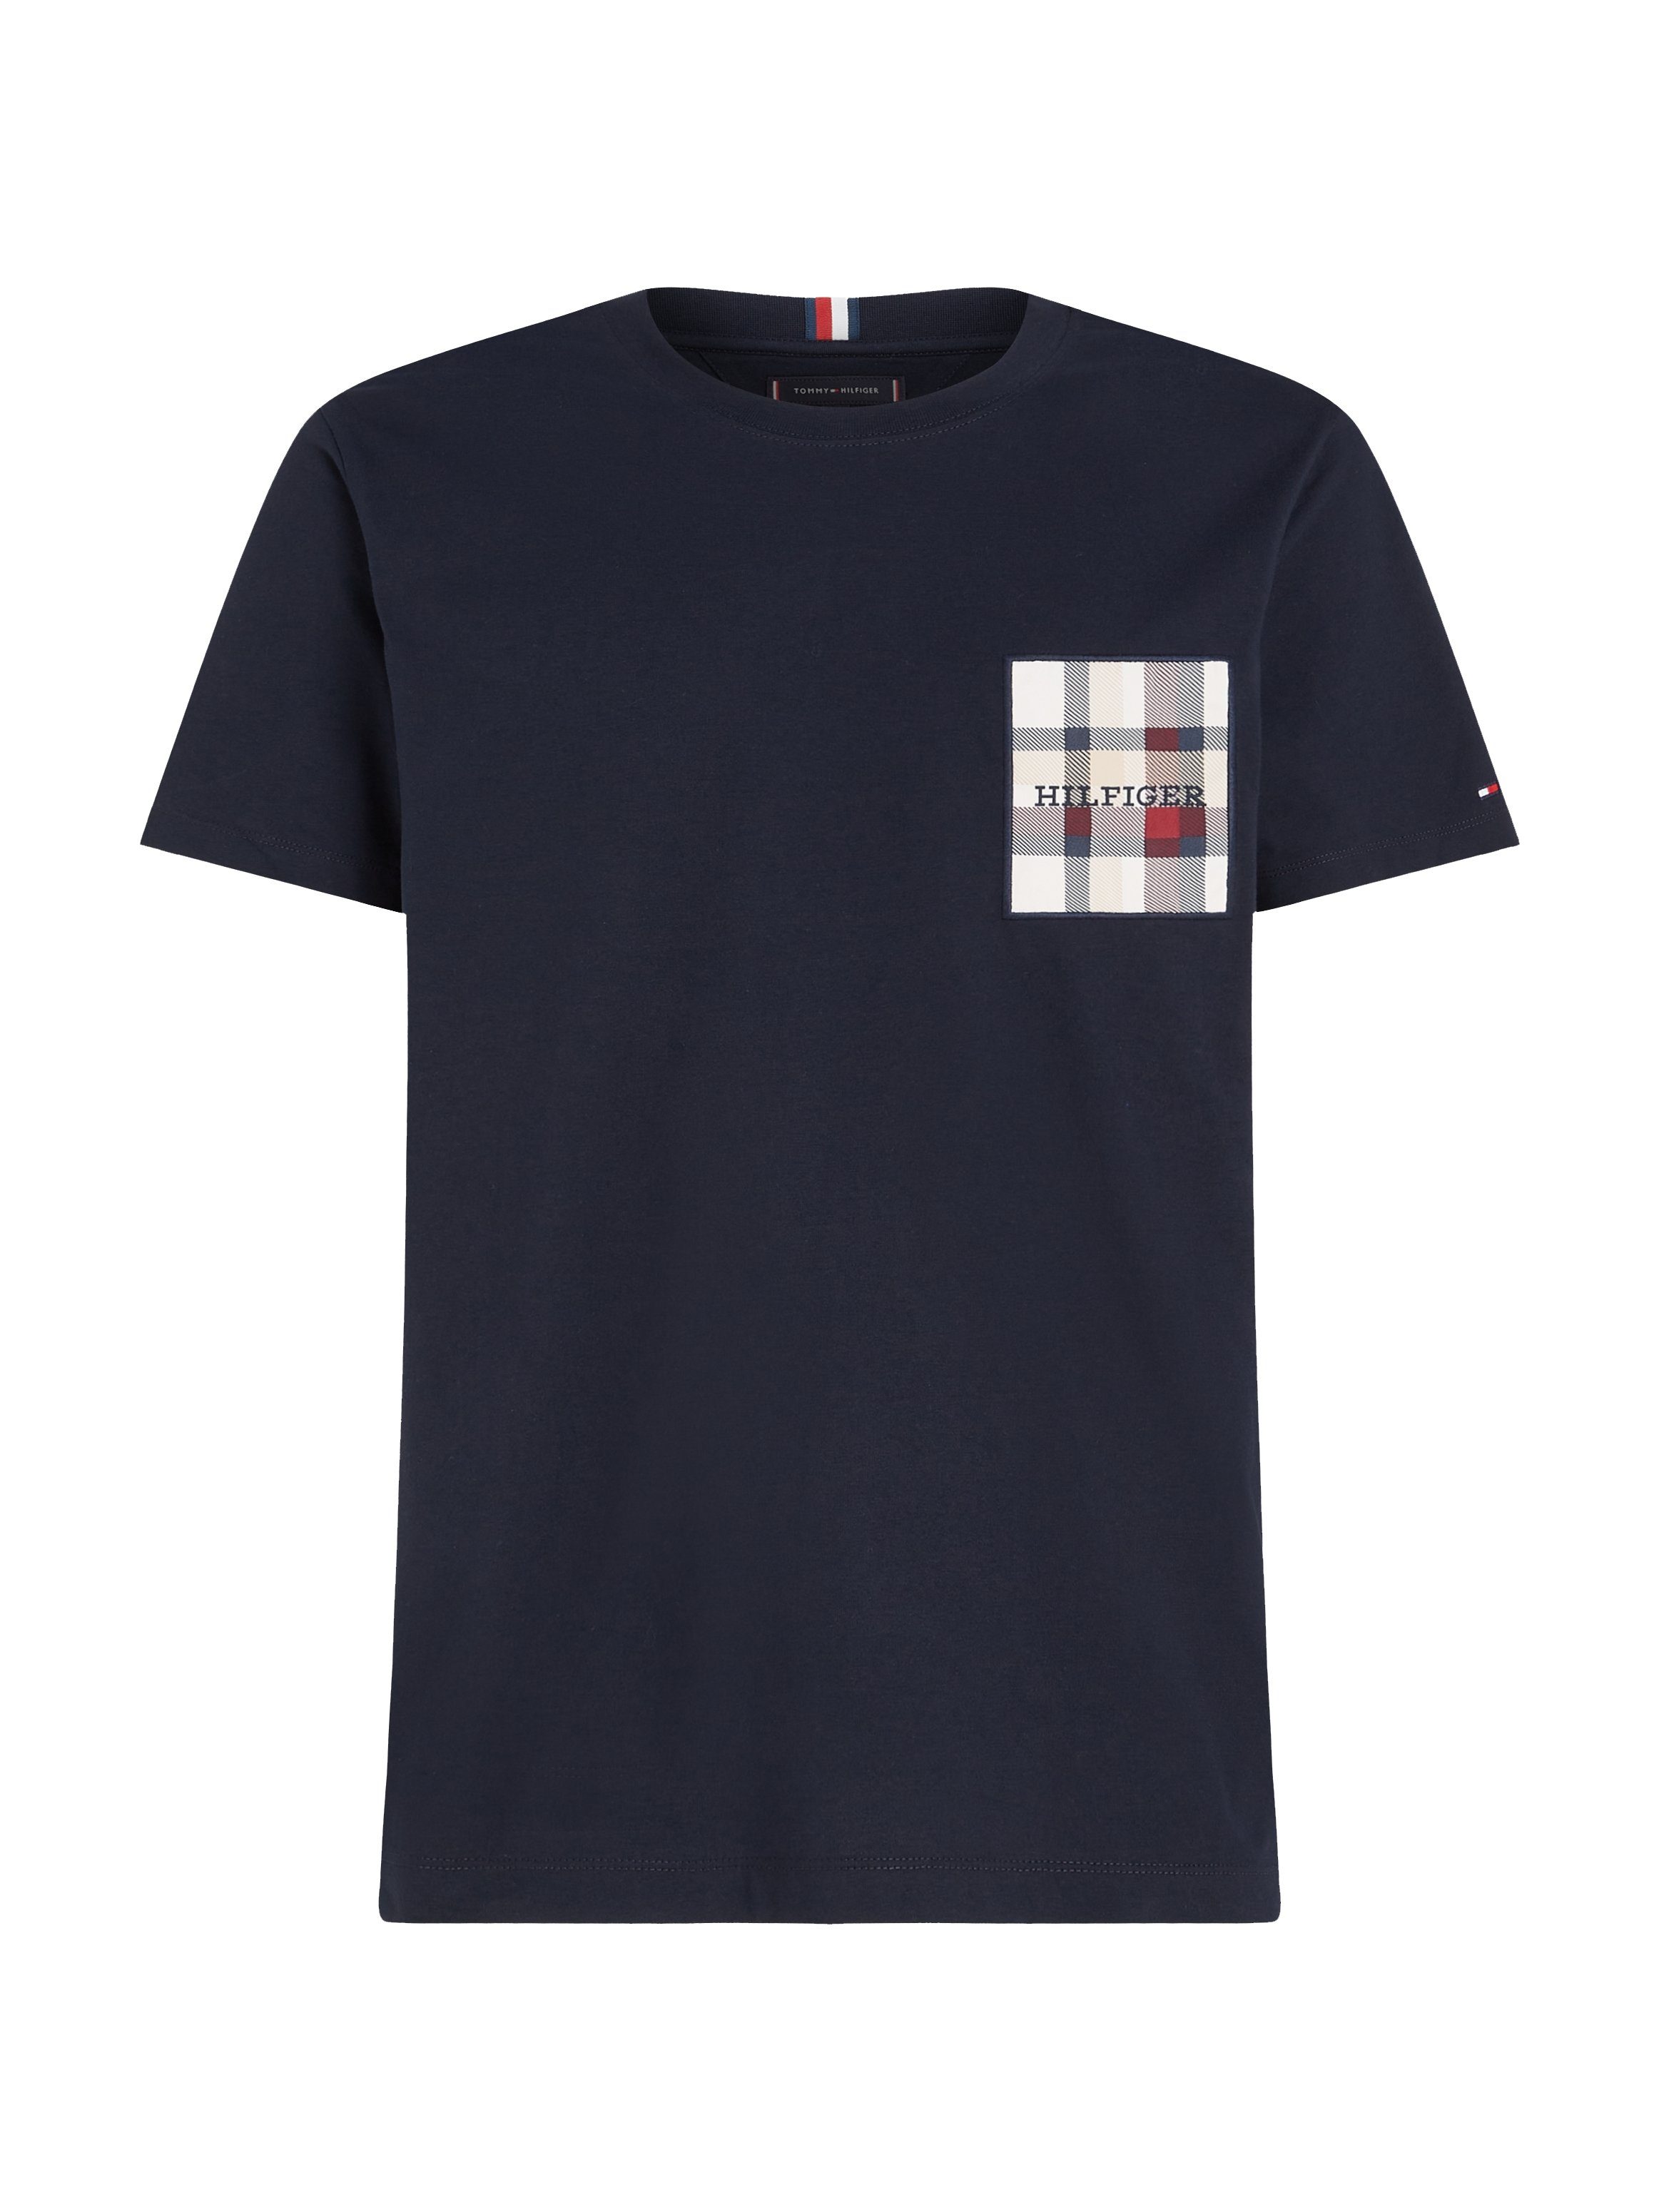 LABEL TEE T-Shirt Tommy Hilfiger CHECK MONOTYPE